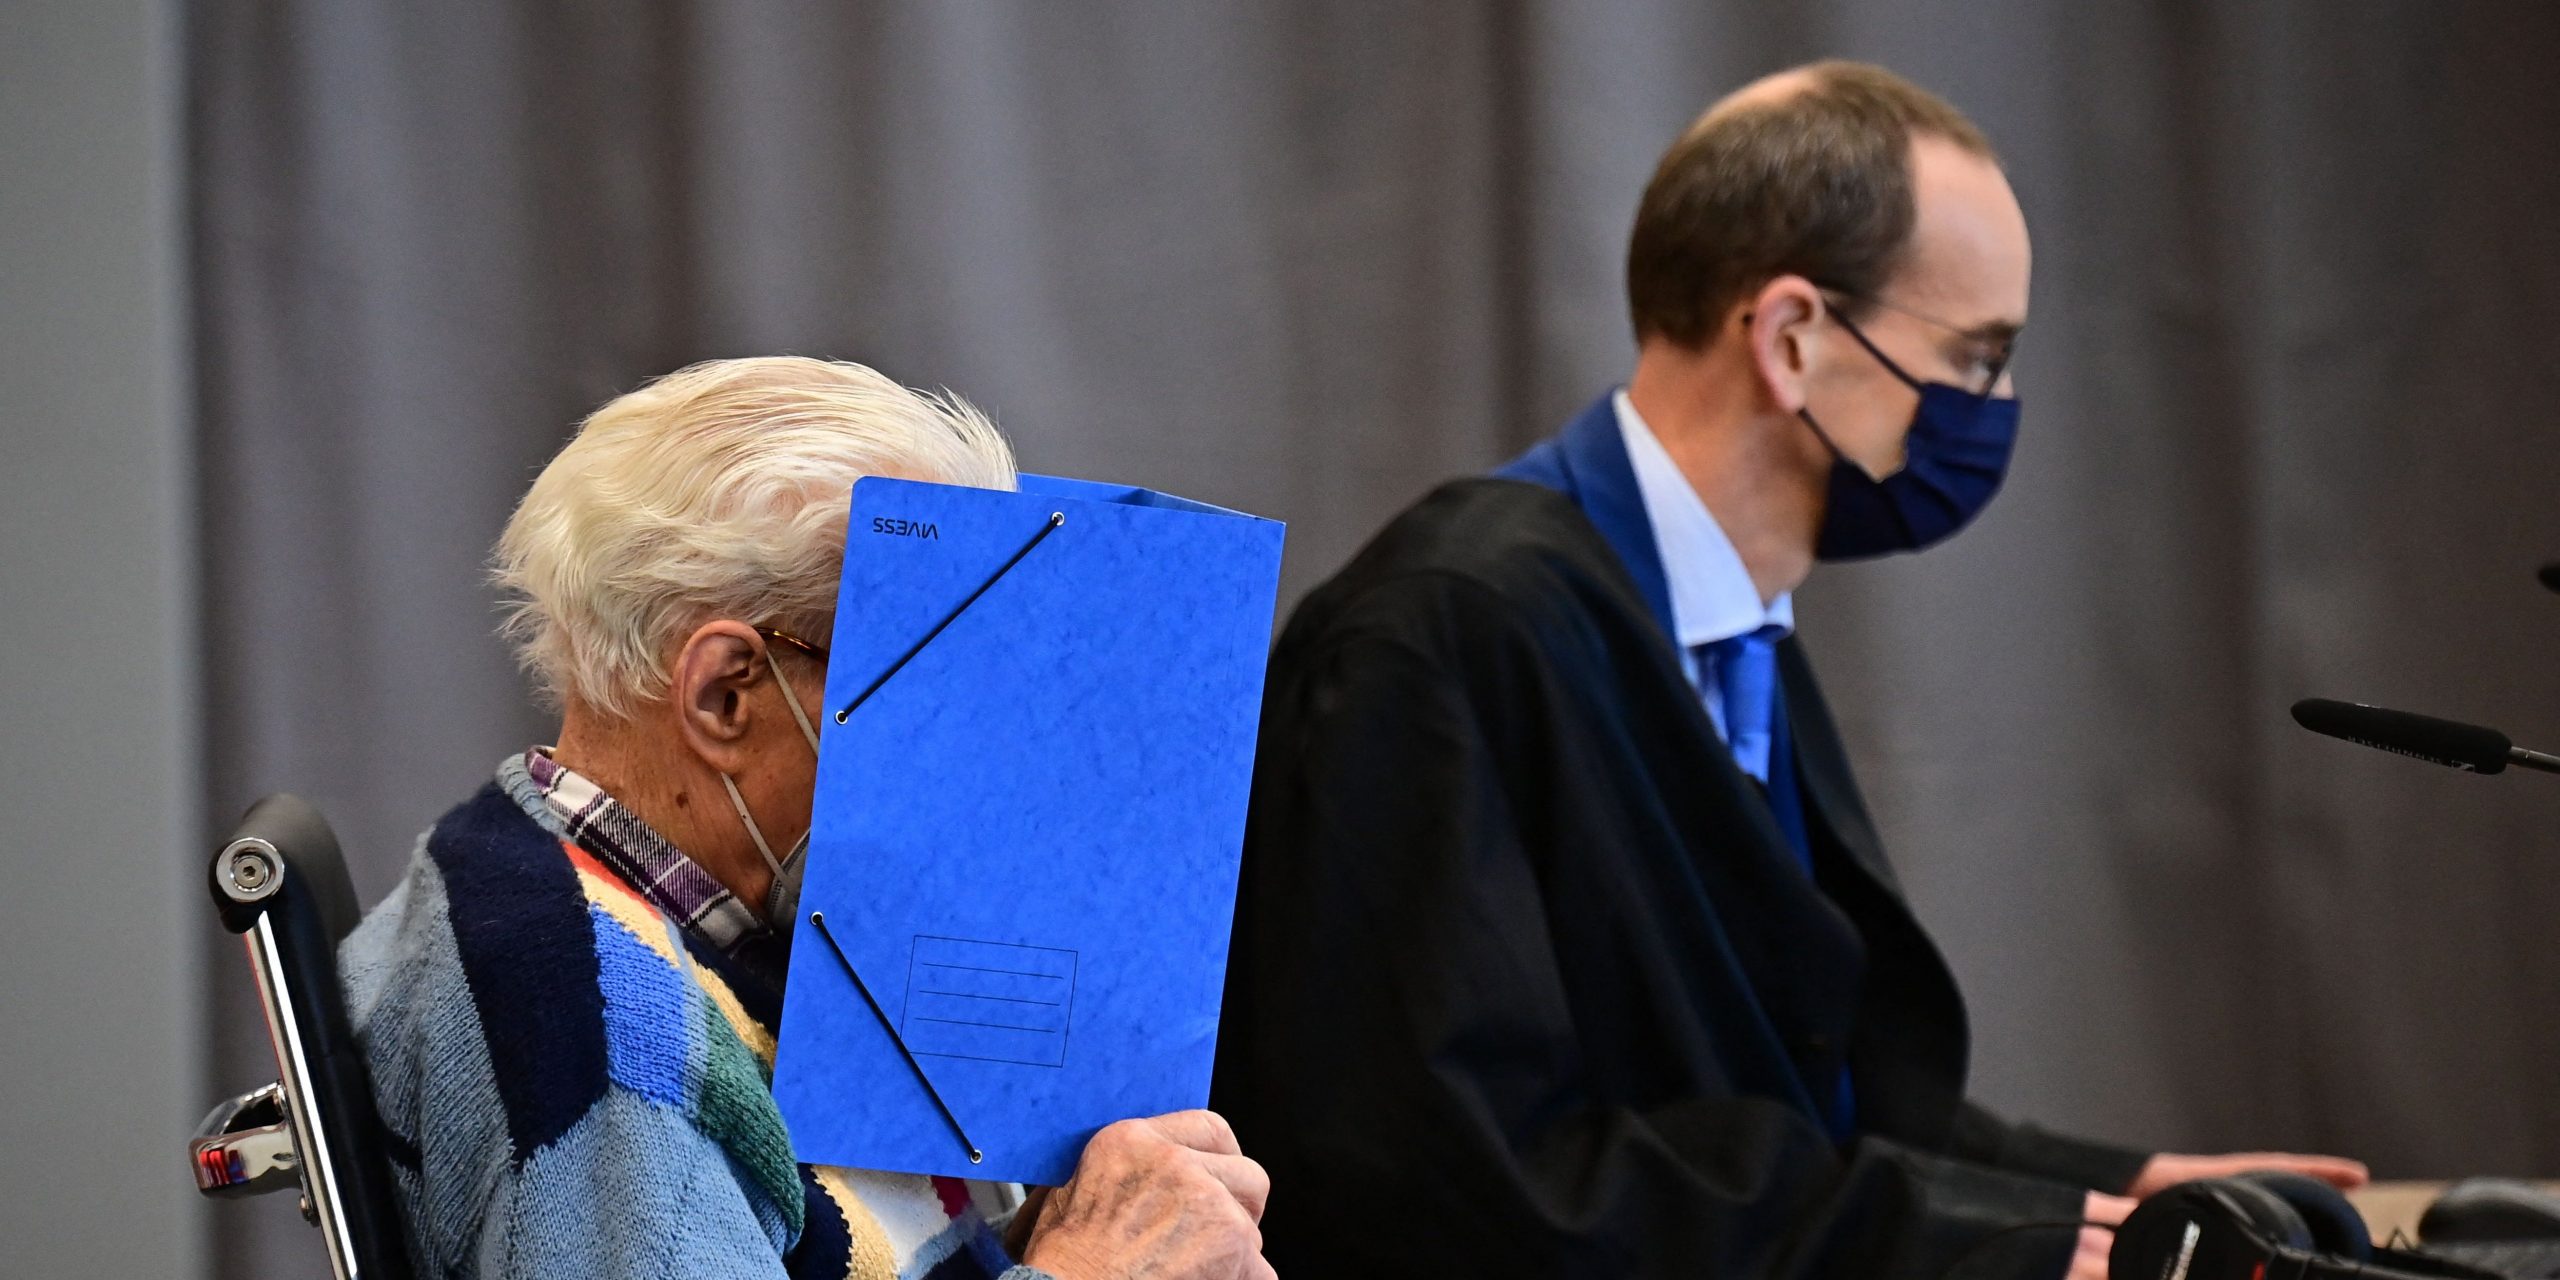 Defendant Josef S. sits while holding a blue folder in front of his face.